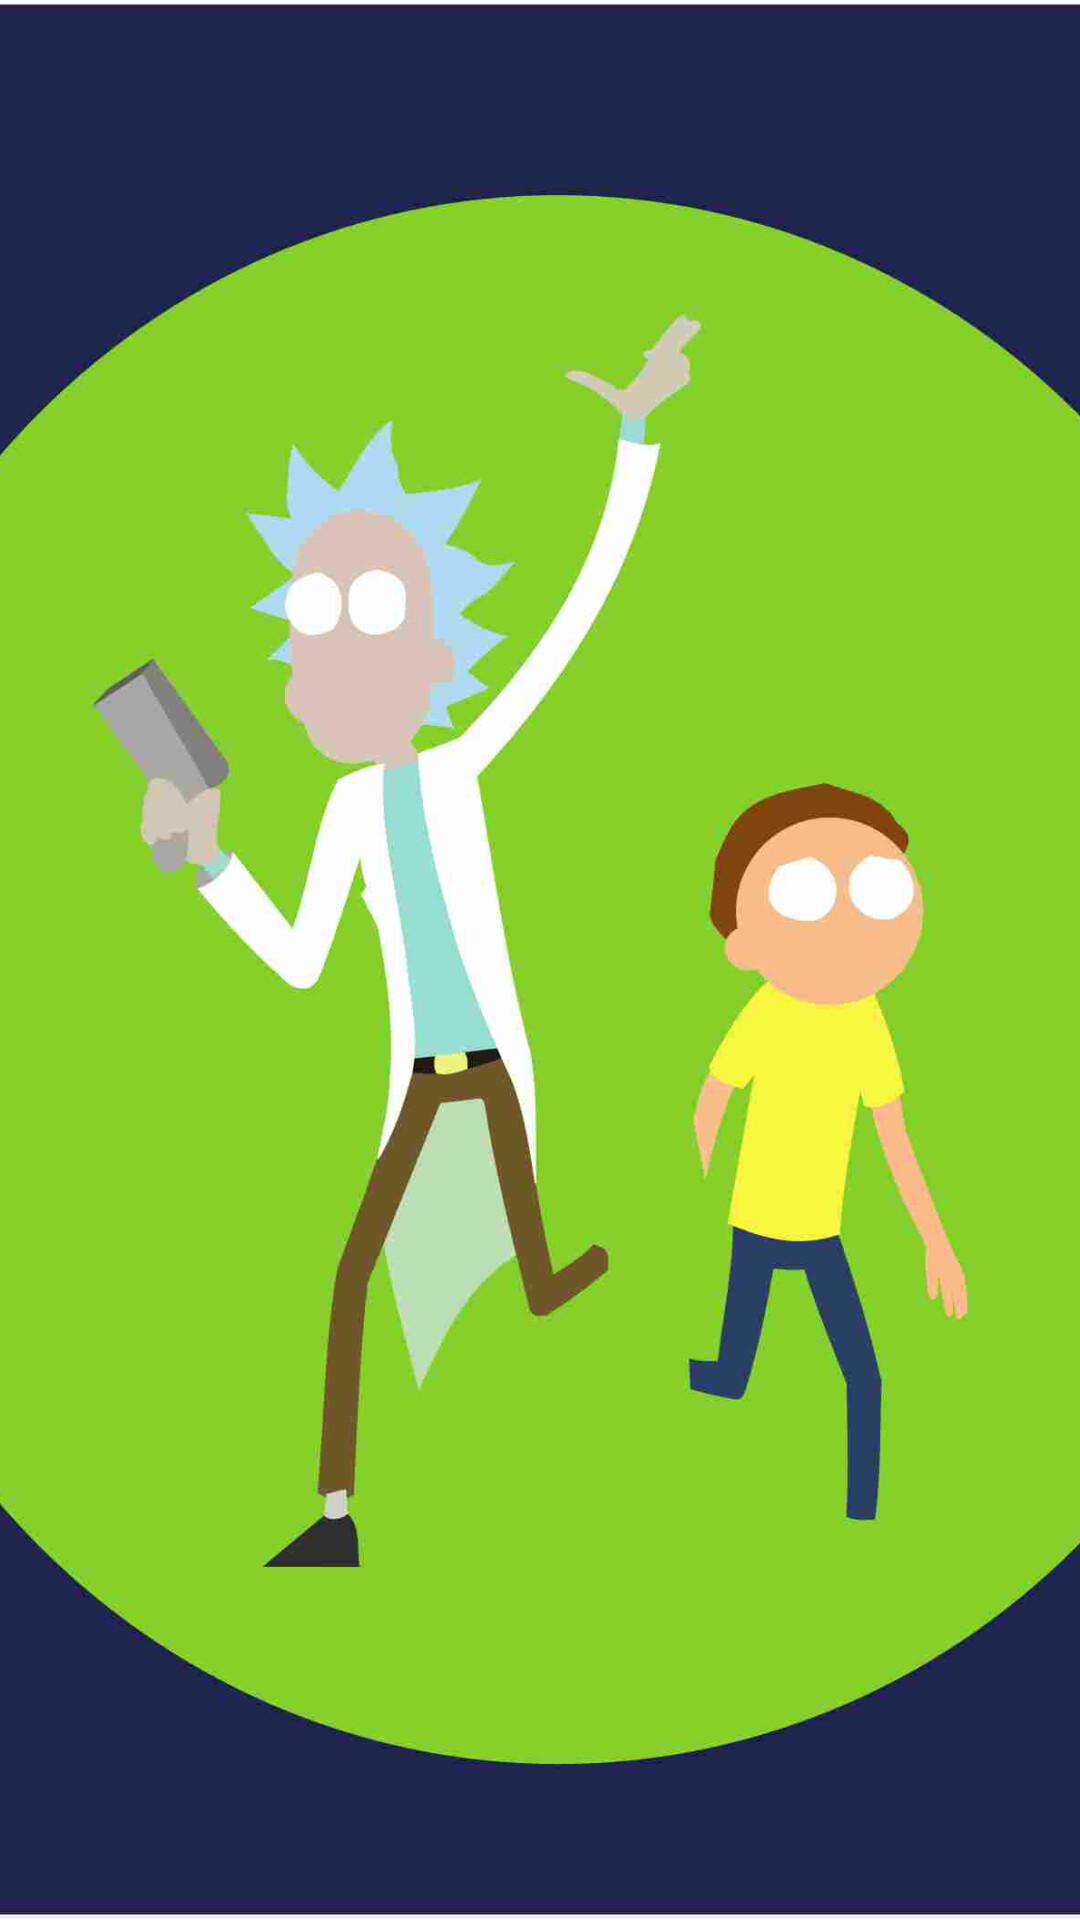 Rick and Morty: Rick Sanchez C-137, Mortimer Chauncey "Morty" Smith, Sr. 1080x1920 Full HD Background.